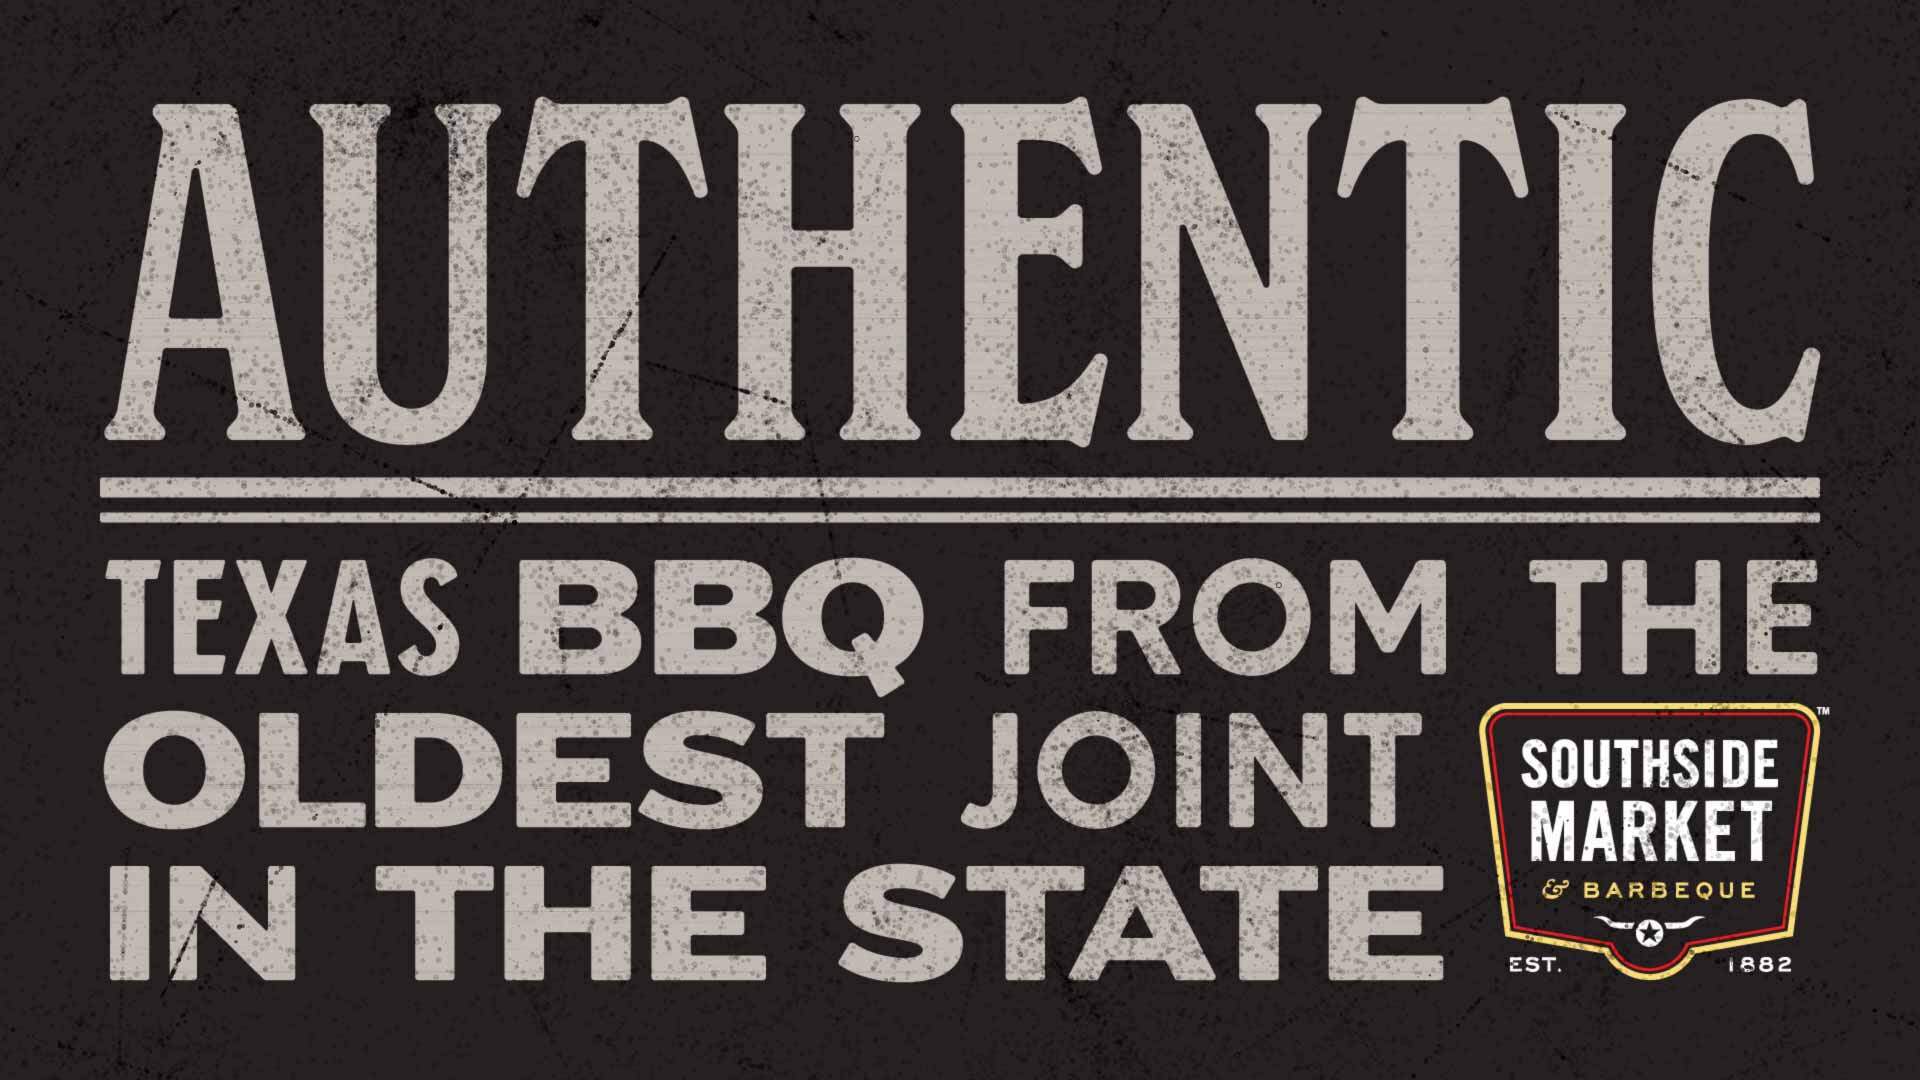 Key graphic design example as part of the brand update of Southside Market & Barbeque which reads "AUTHENTIC TEXAS BBQ FROM THE OLDEST JOINT IN THE STATE"